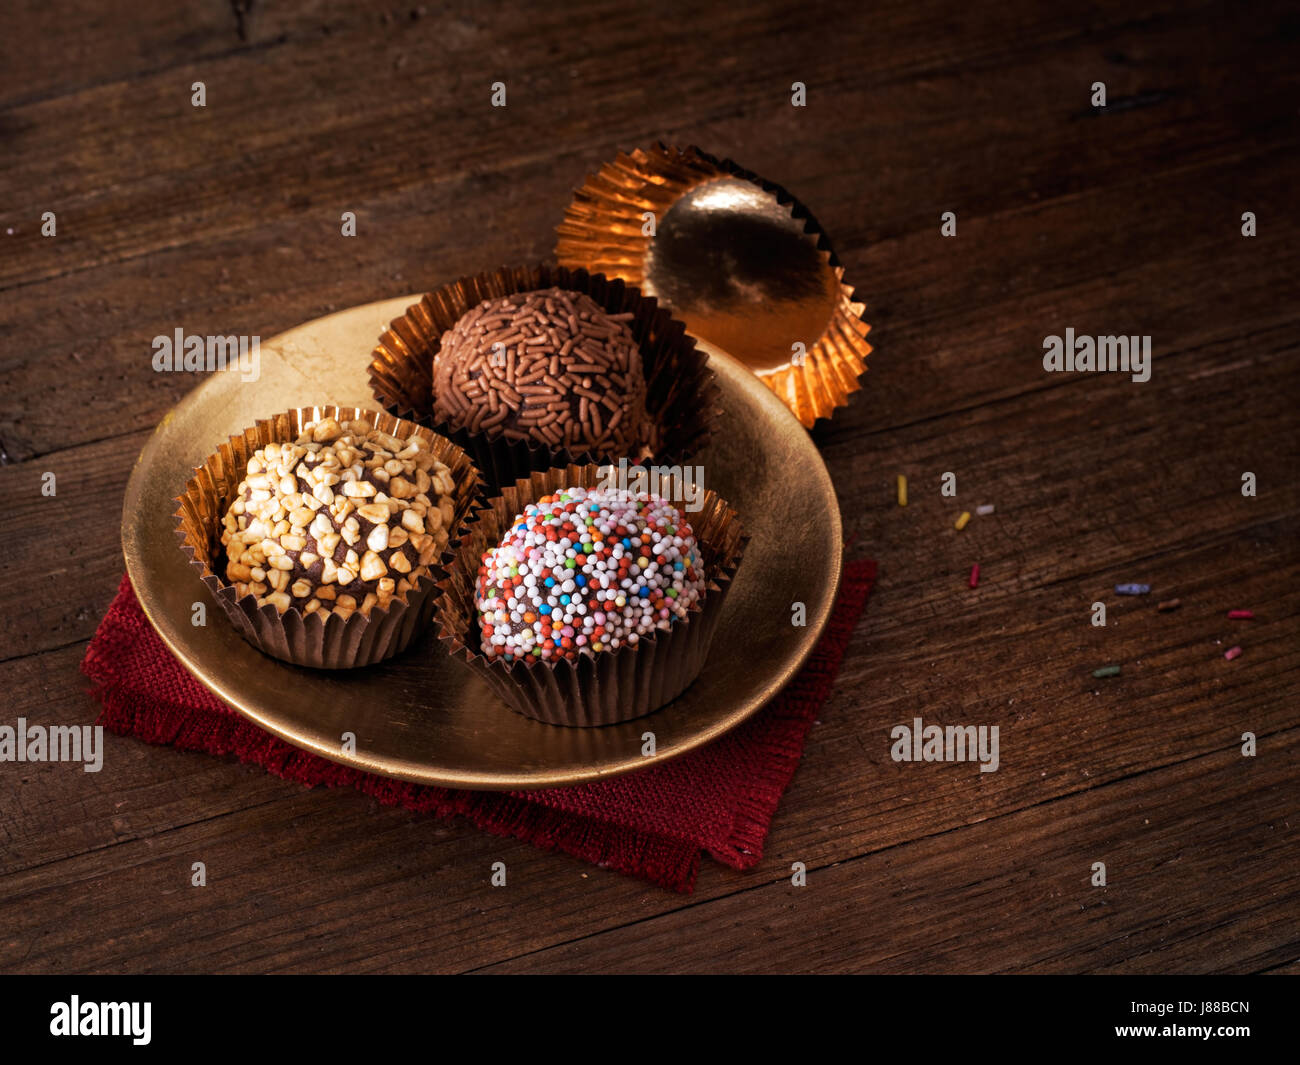 Tempting hand made chocolate truffles. Delicious treats. Irresistible! Stock Photo